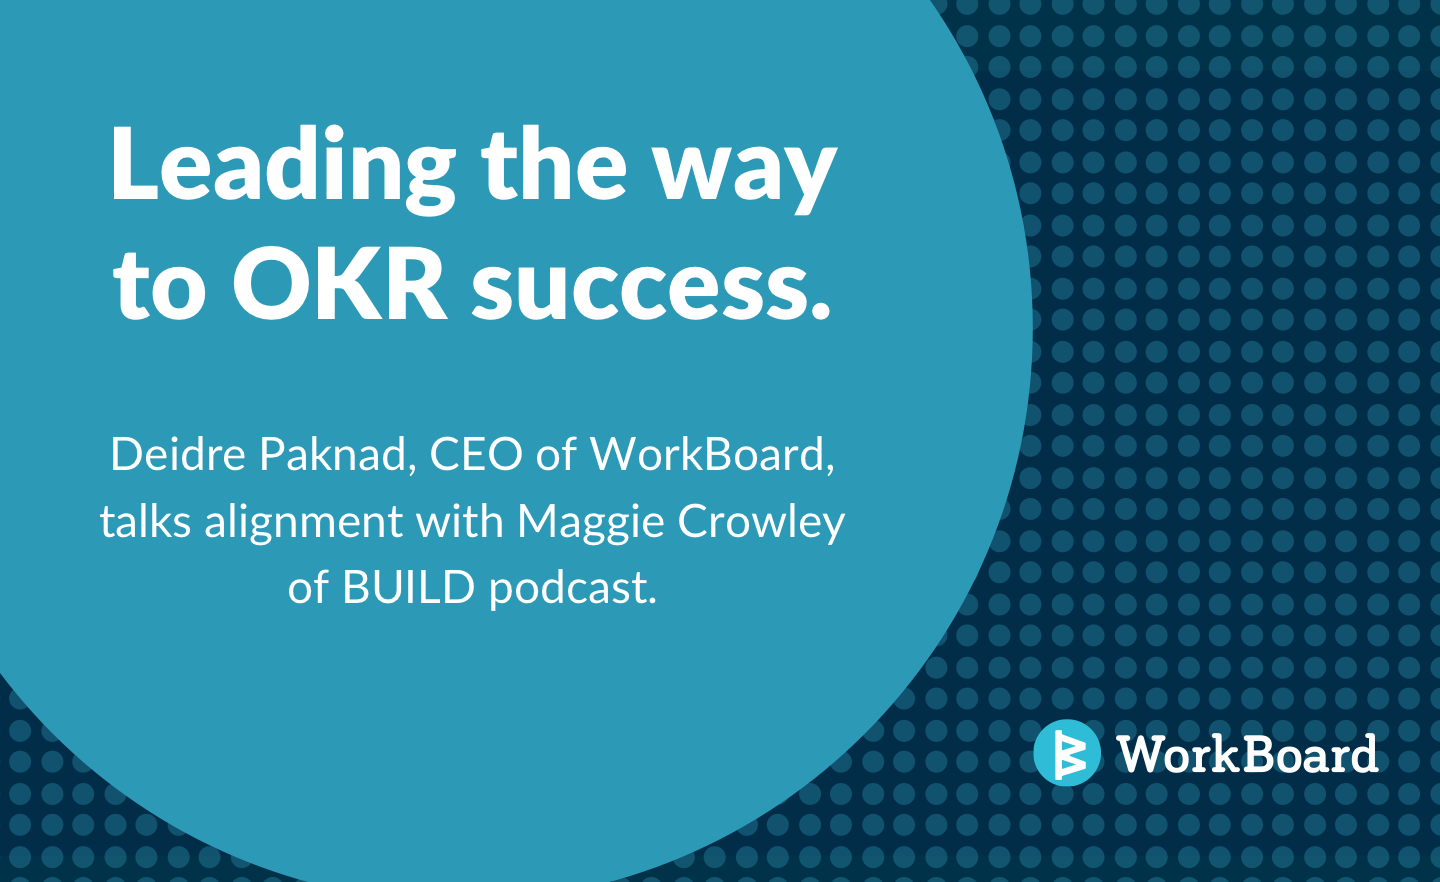 Blog Post: Leading the Way to OKR Success